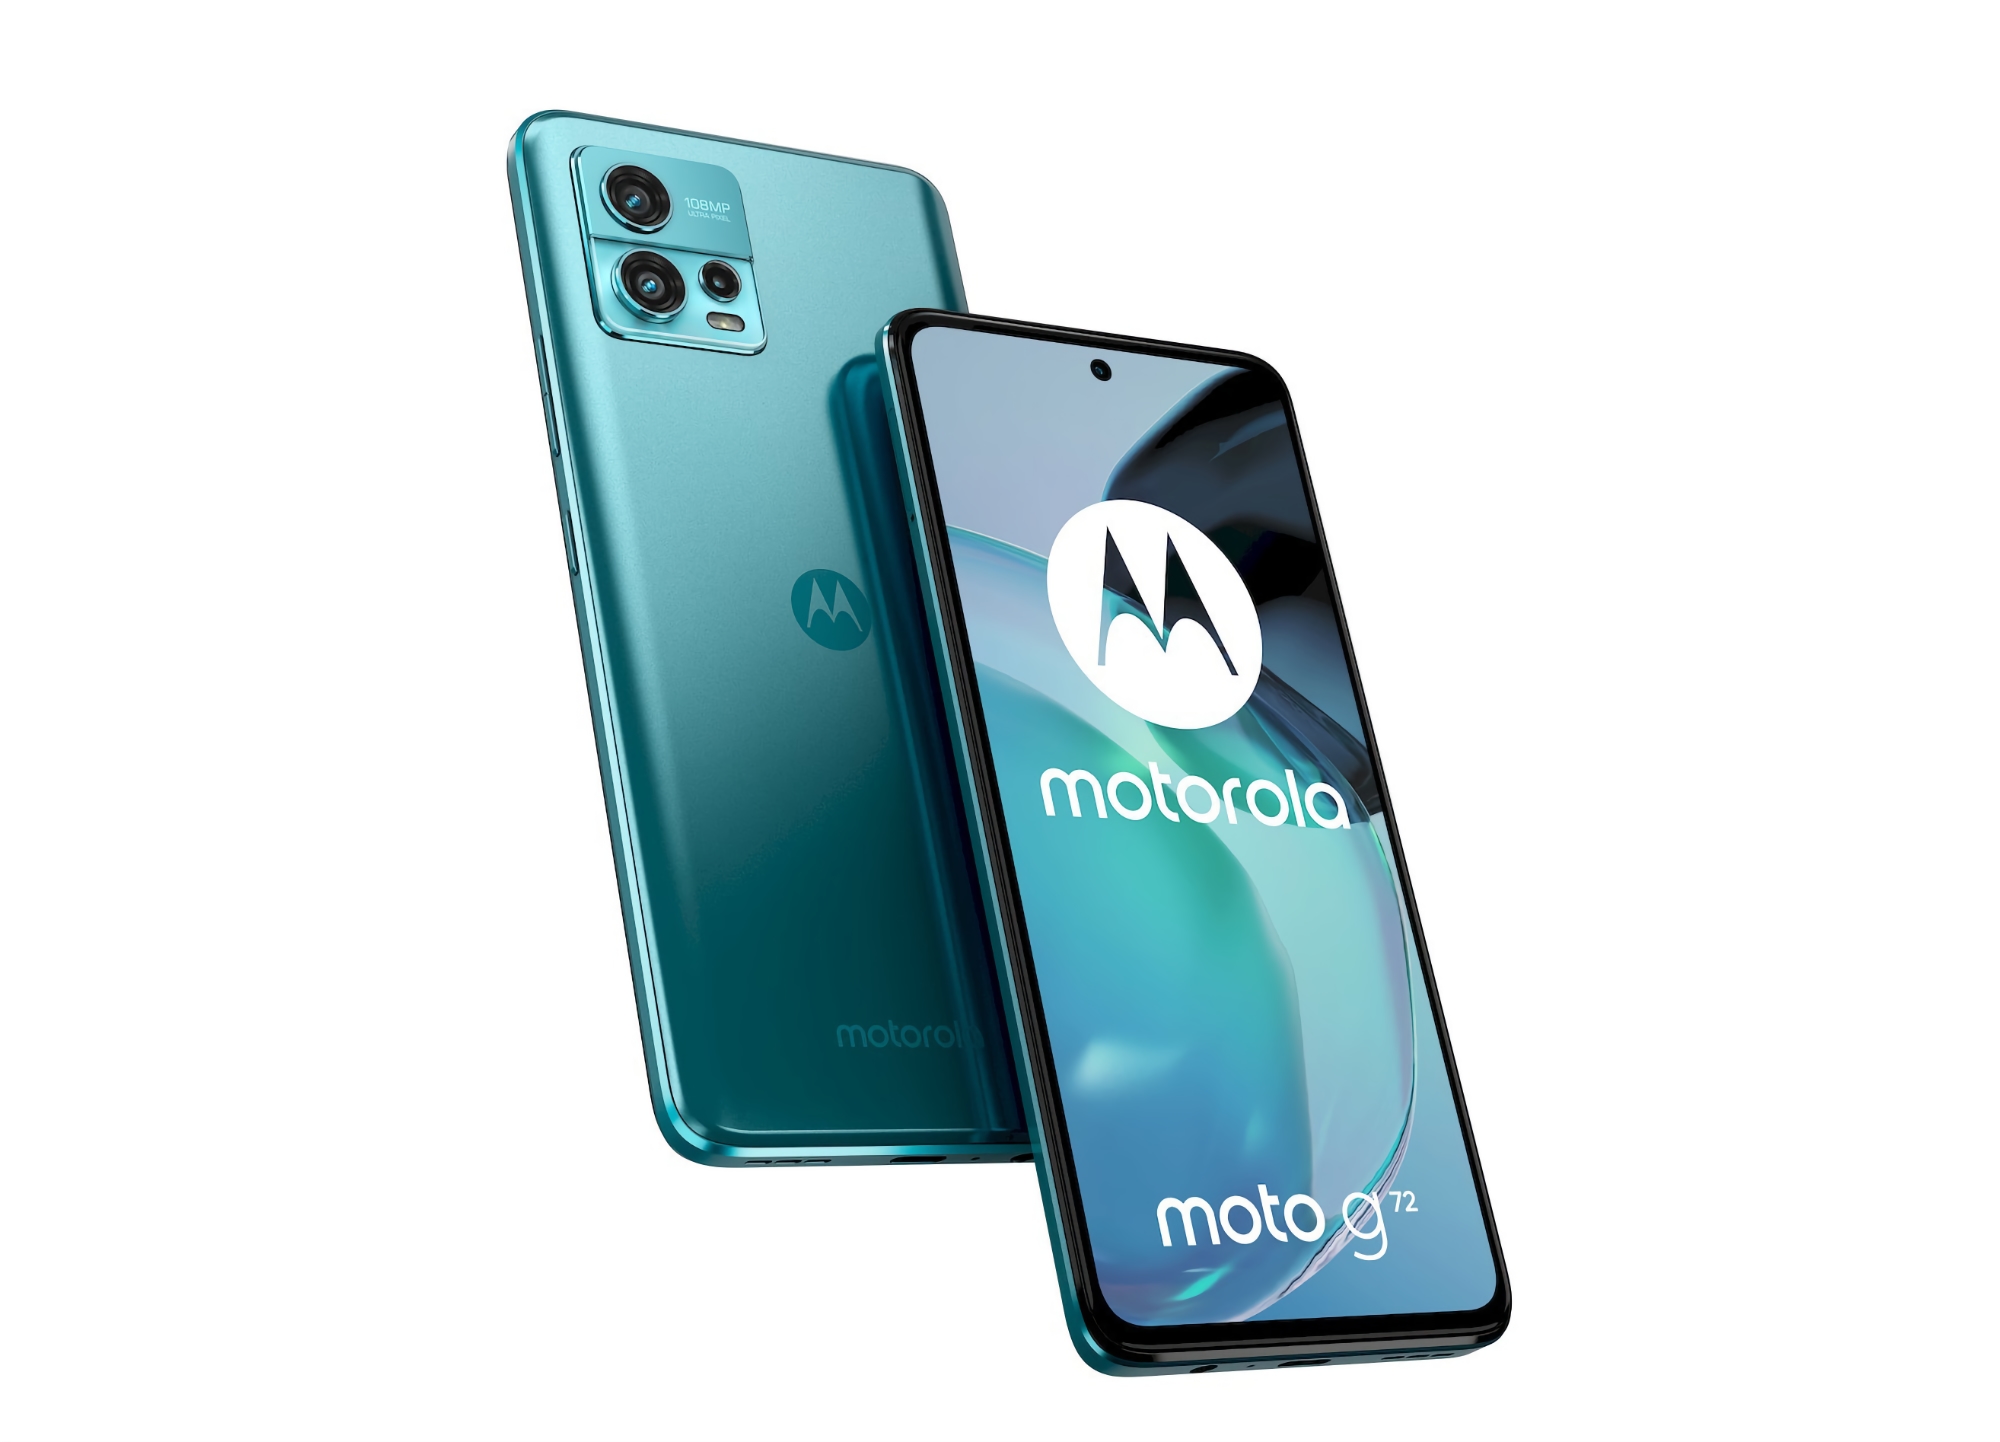 Motorola unveiled the Moto G72 in Europe: MediaTek Helio G99 chip, 108 MP camera and IP52 protection for €260